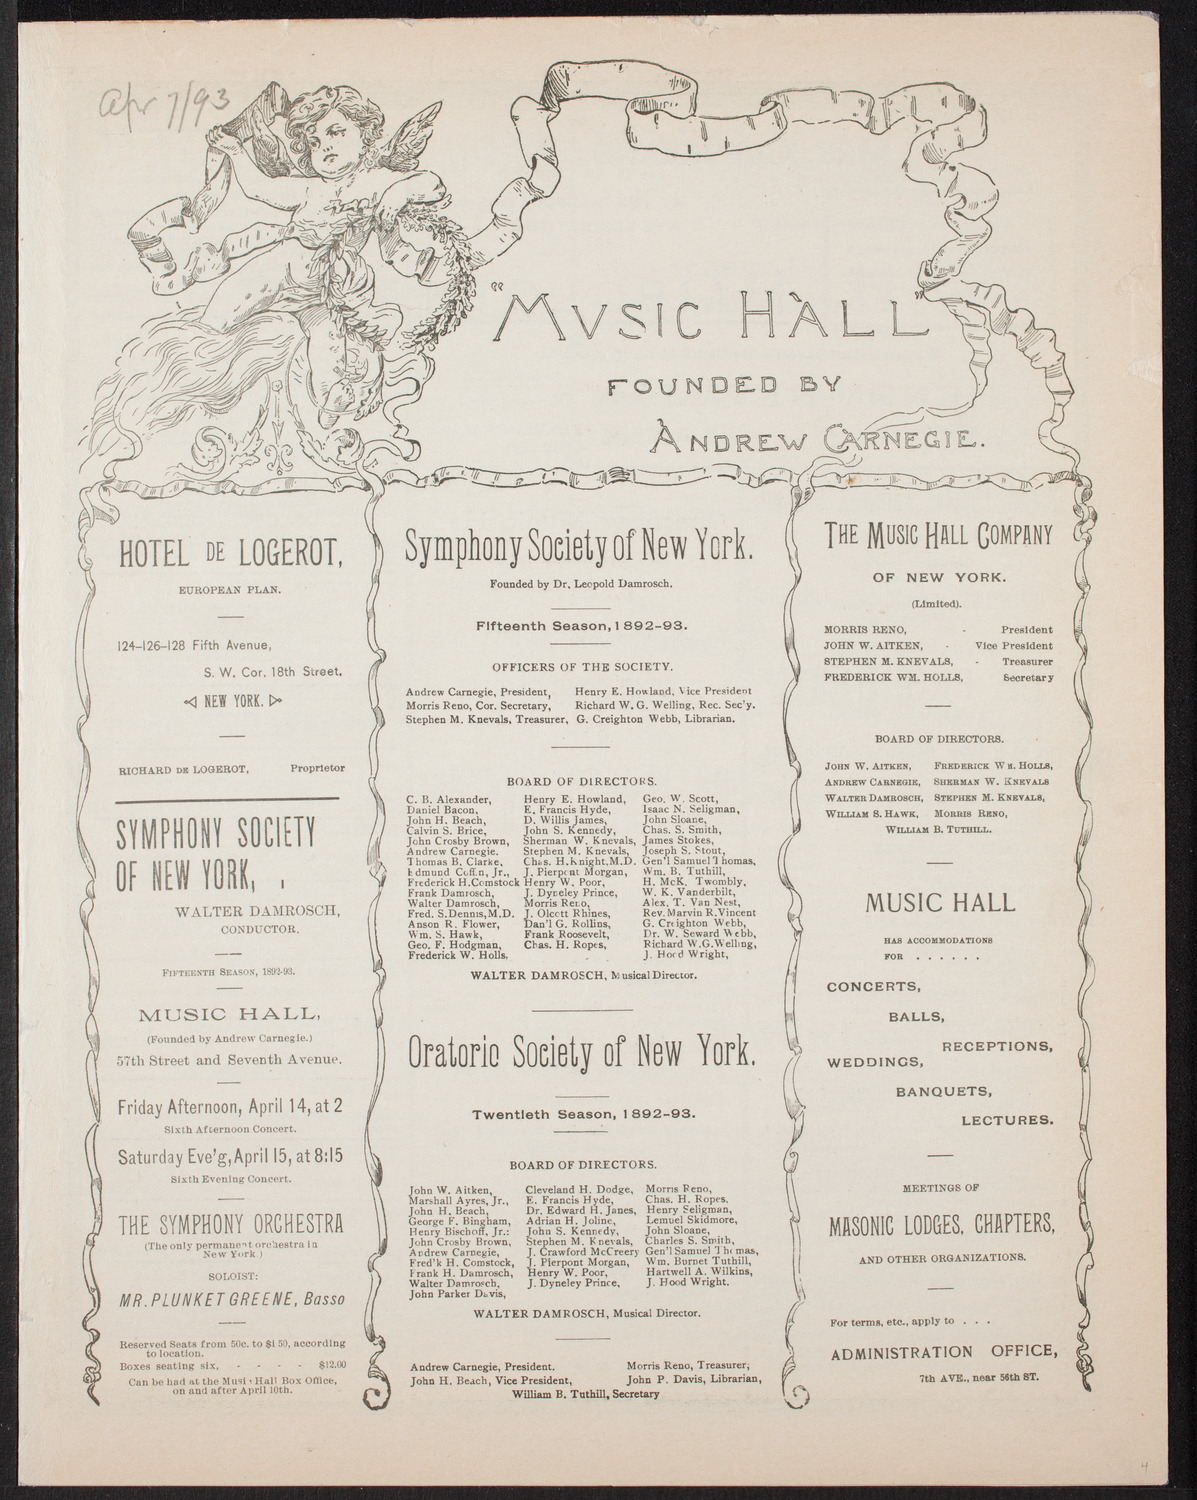 Grand Wagner Concert/ Benefit: Italian Mission, Church of San Salvatore, April 7, 1893, program page 1